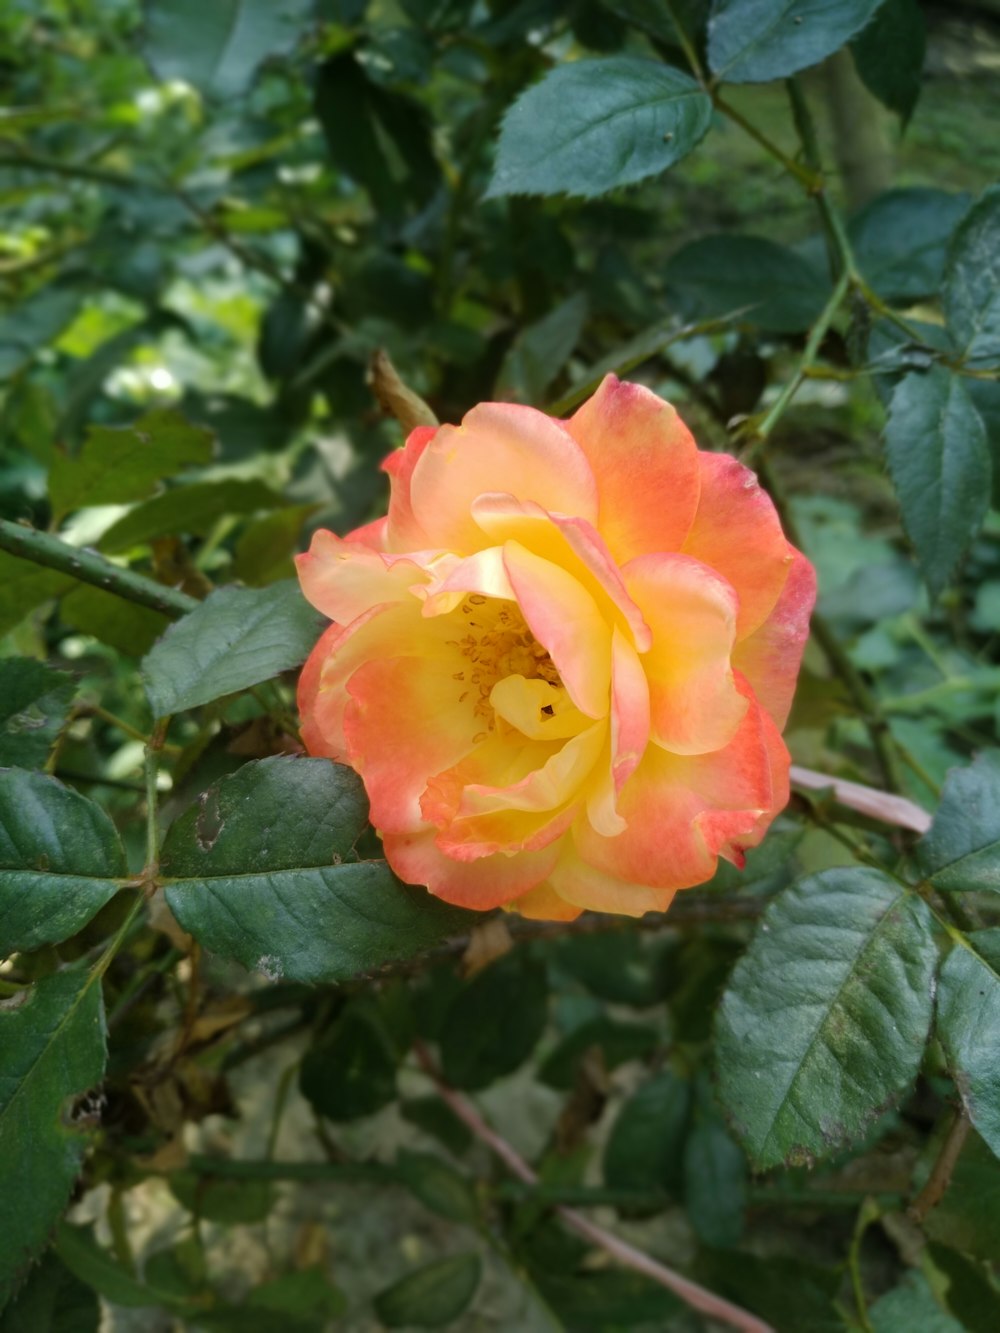 a yellow and orange rose with green leaves